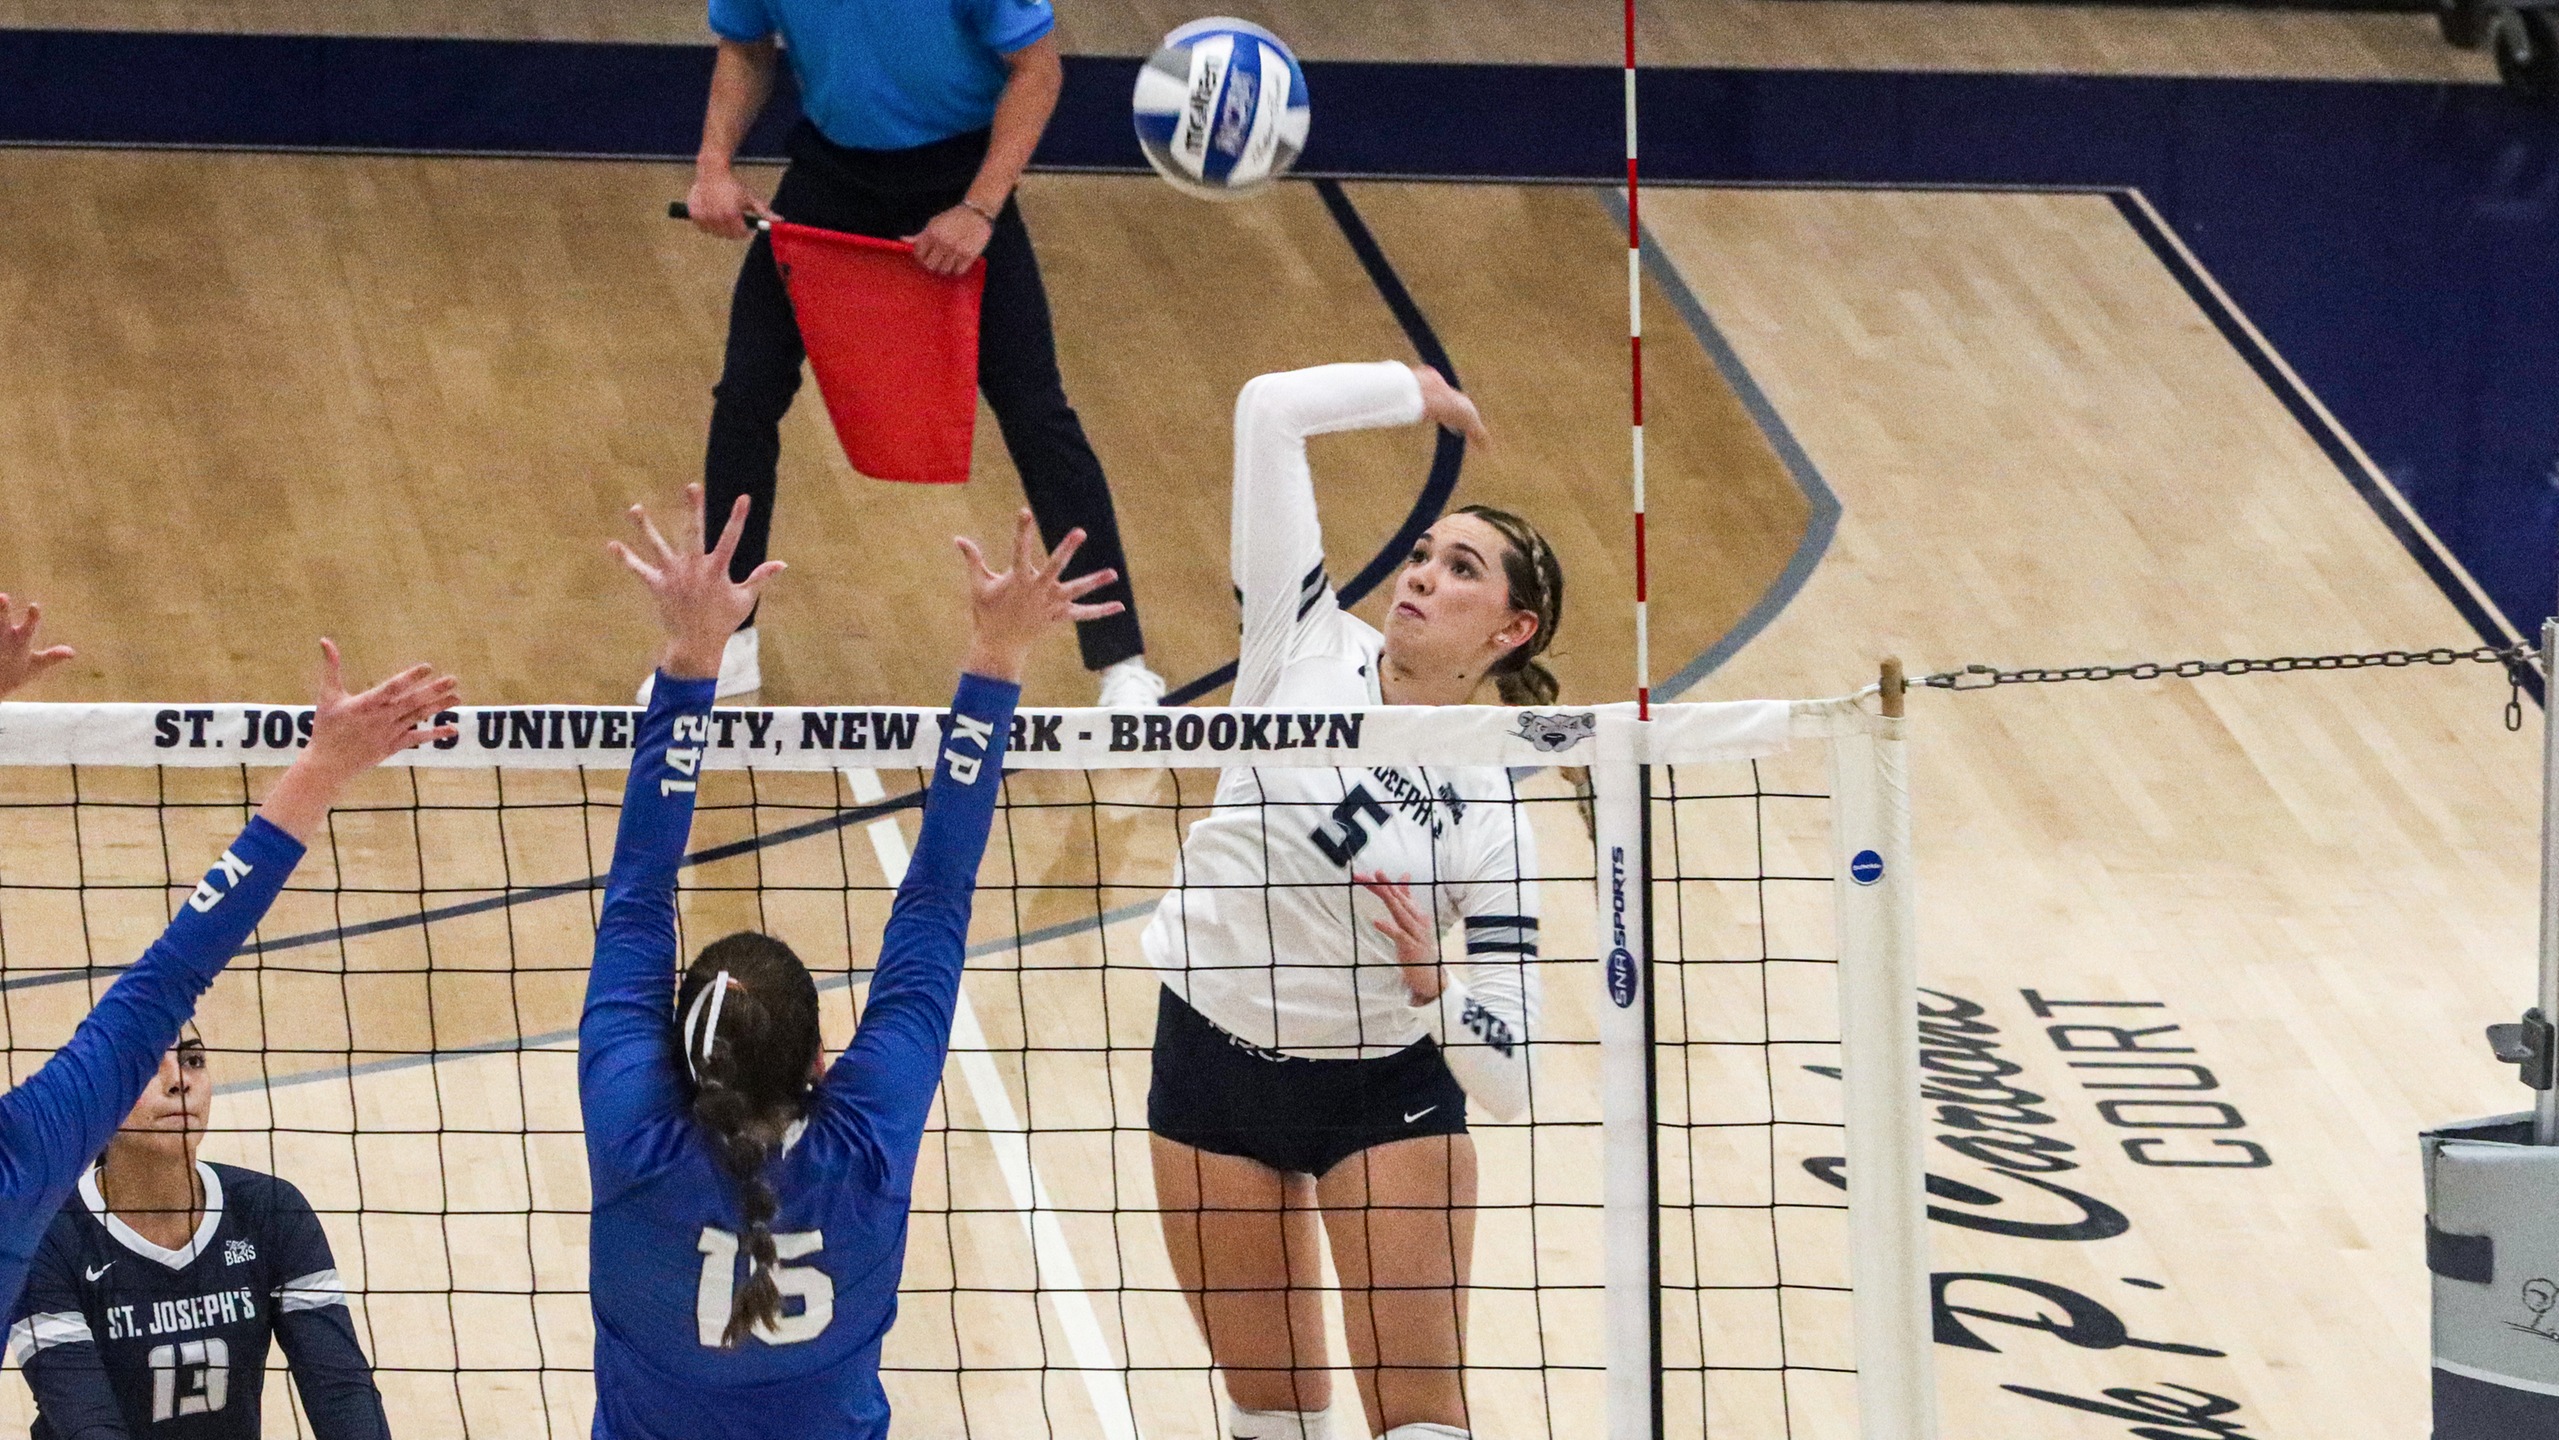 Women’s Volleyball Suffers Skyline Setback Against USMMA